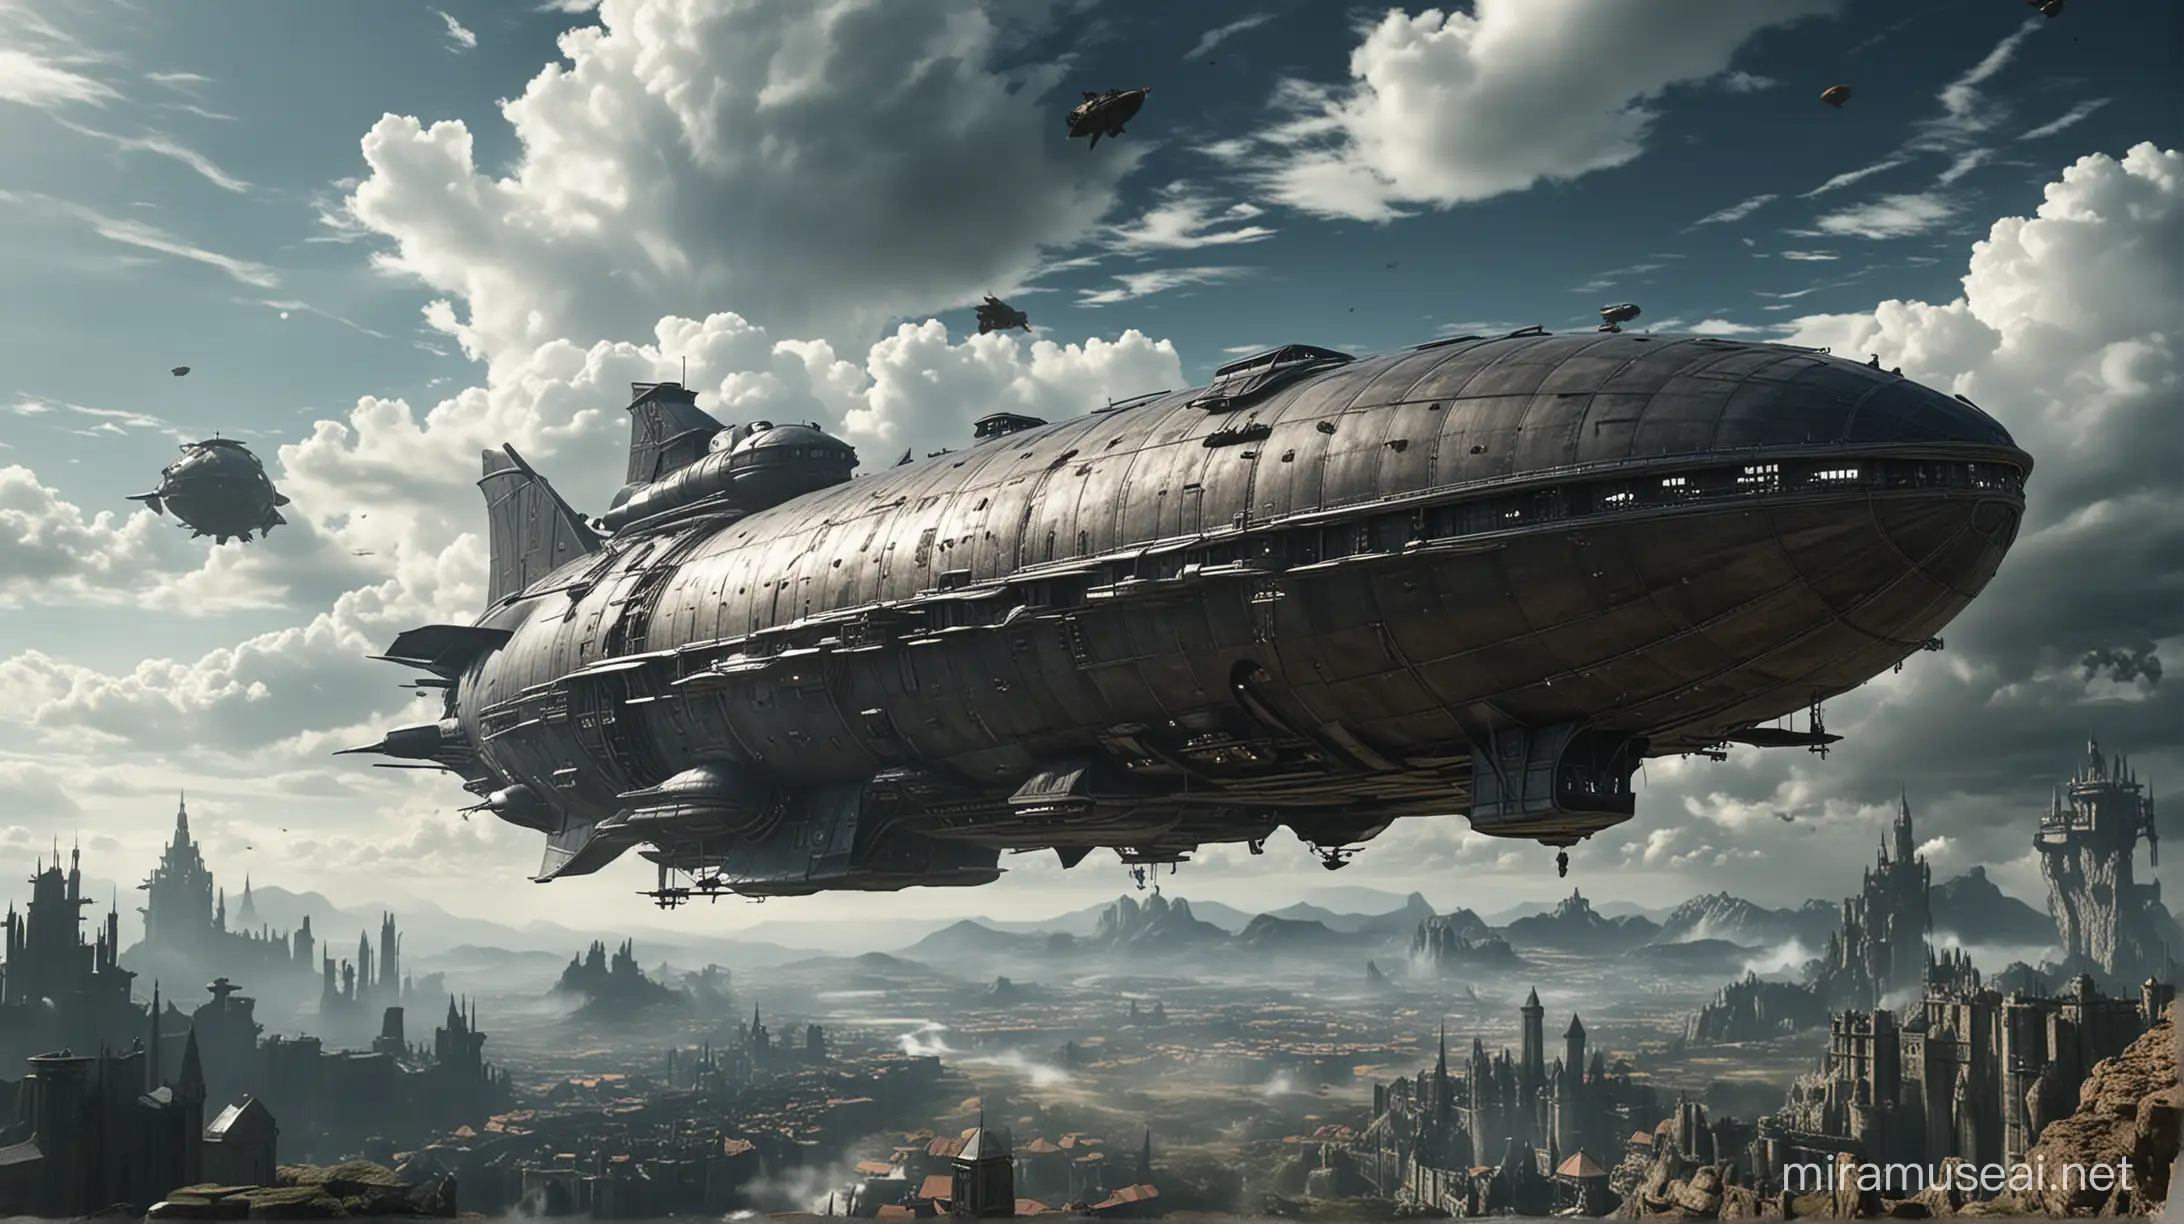 Final Fantasy Live Action movie, inspired by the early entries in the series (in particular the first game) with elements from across the series.  Technologically advance airships, slightly resembling modern day tech, hover ominously over a medieval fantasy landscape